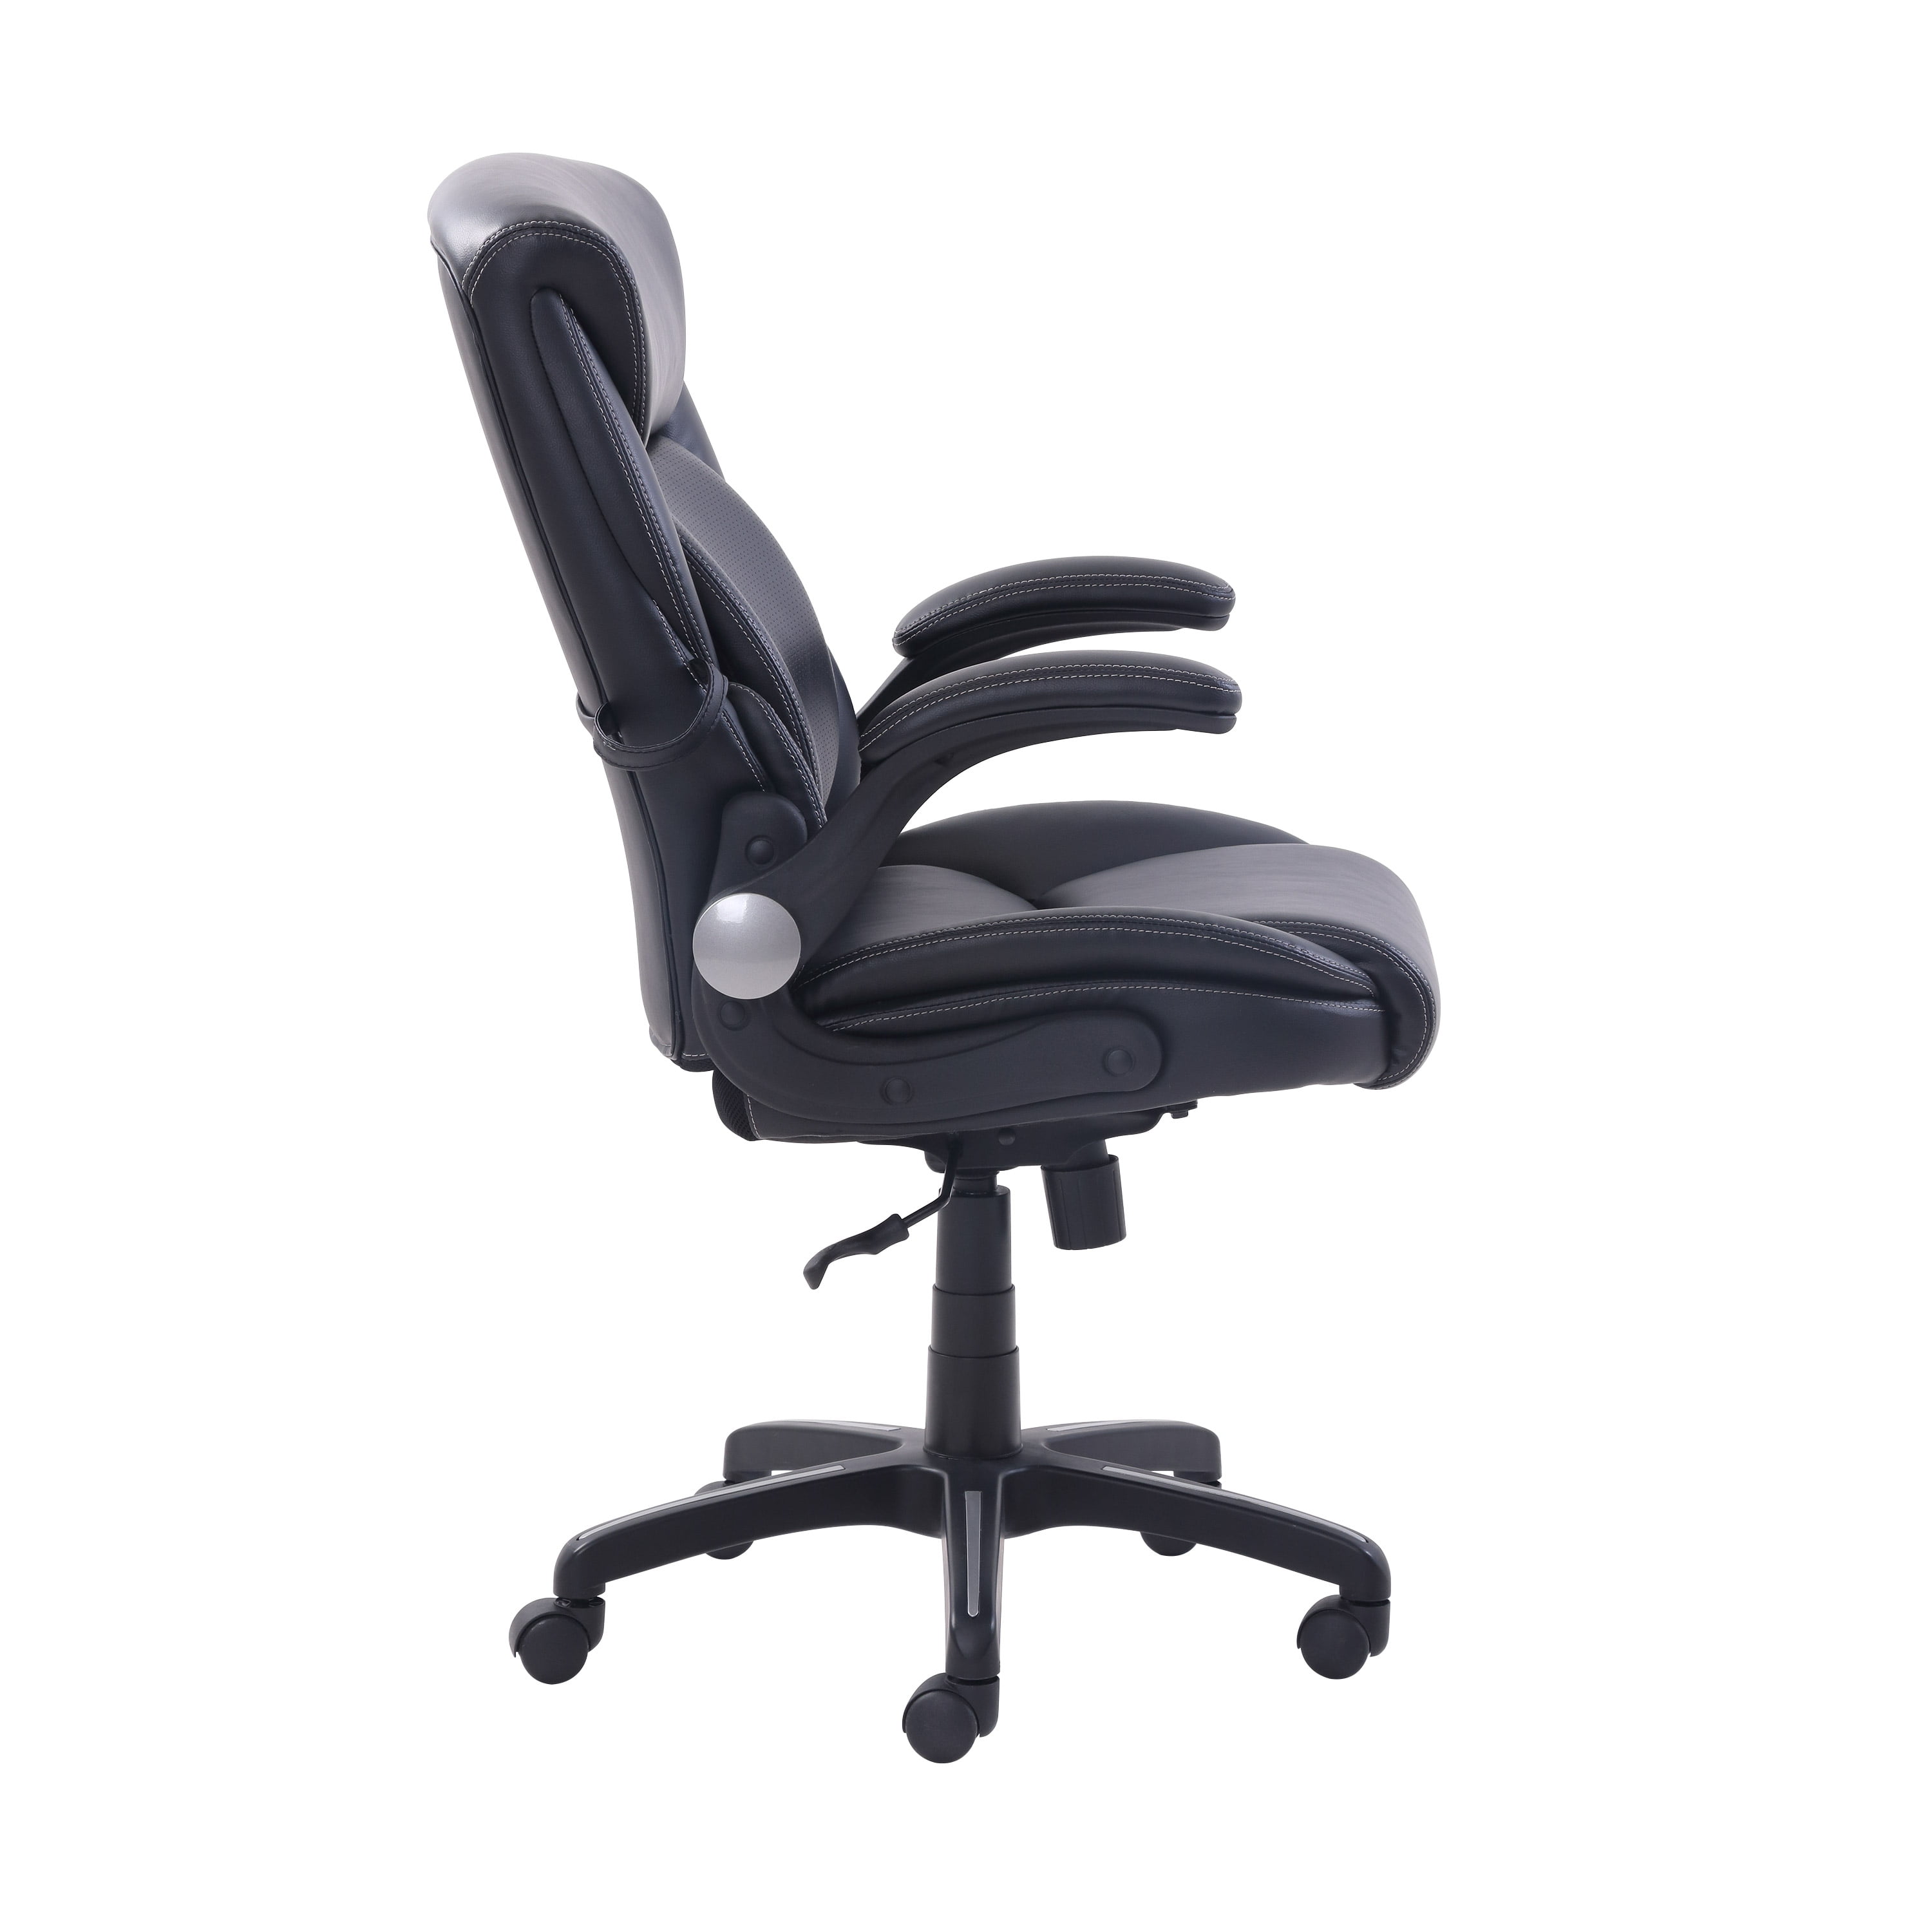 Serta Air Lumbar Bonded Leather Manager Office Chair, Black - 1